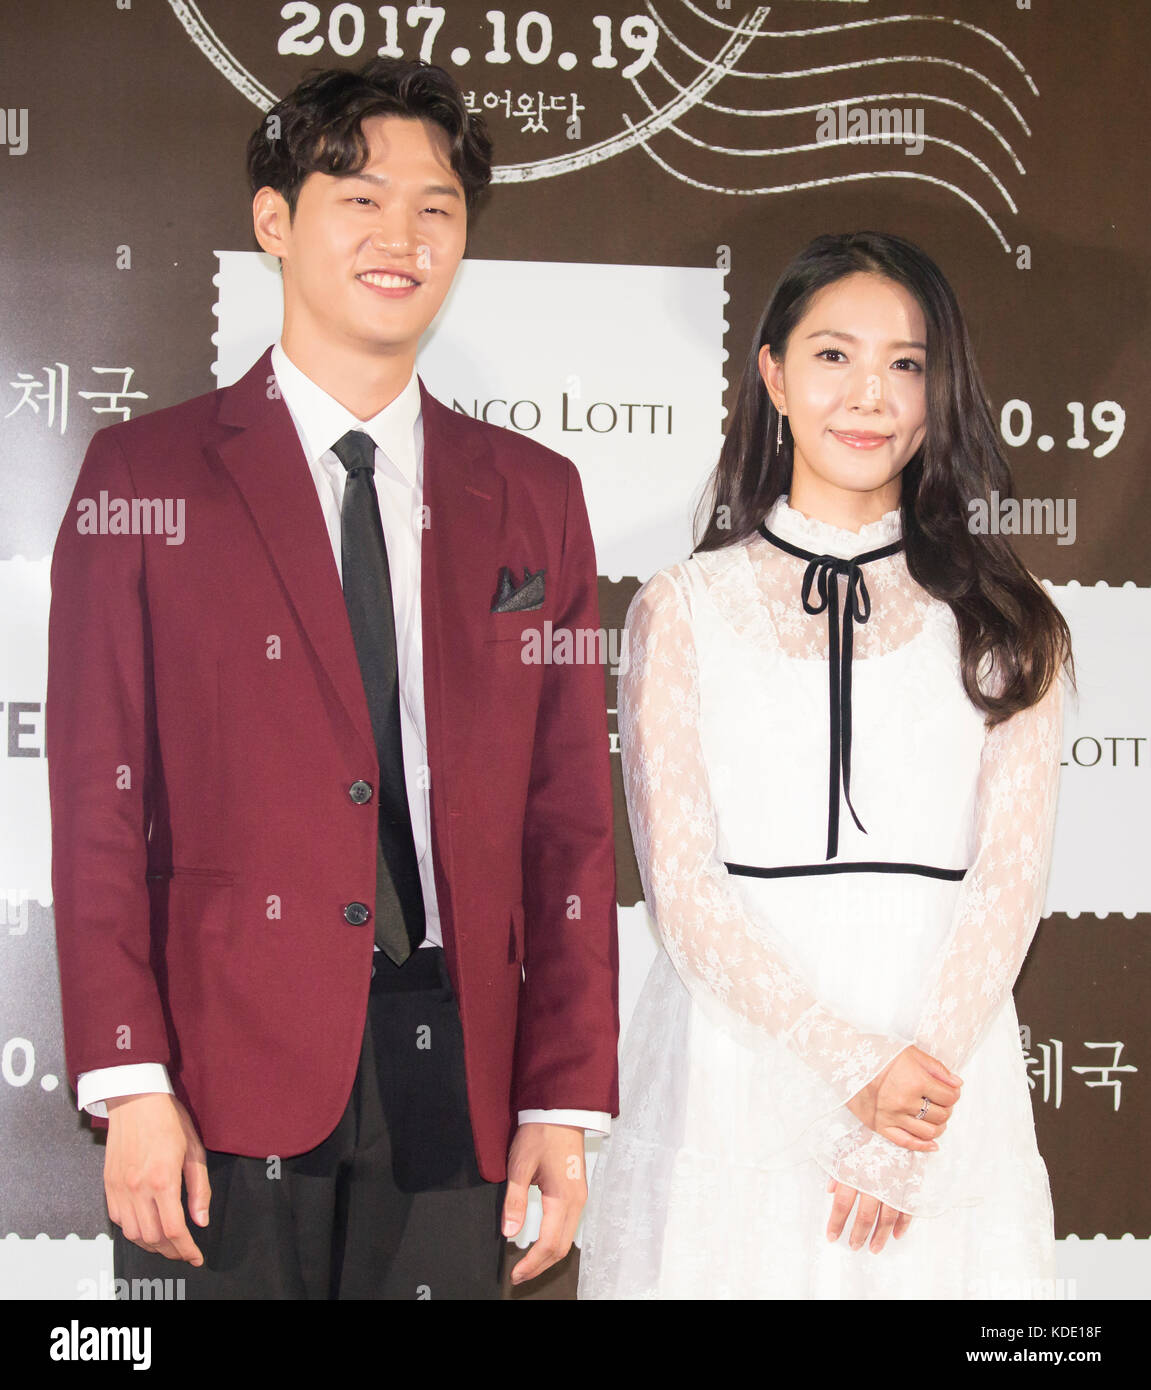 BoA and Lee Hak-Joo, Oct 12, 2017 : South Korean singer and actress BoA (R)  and actor Lee Hak-Joo attend a press conference after a press preview of  their new movie, 'Autumn